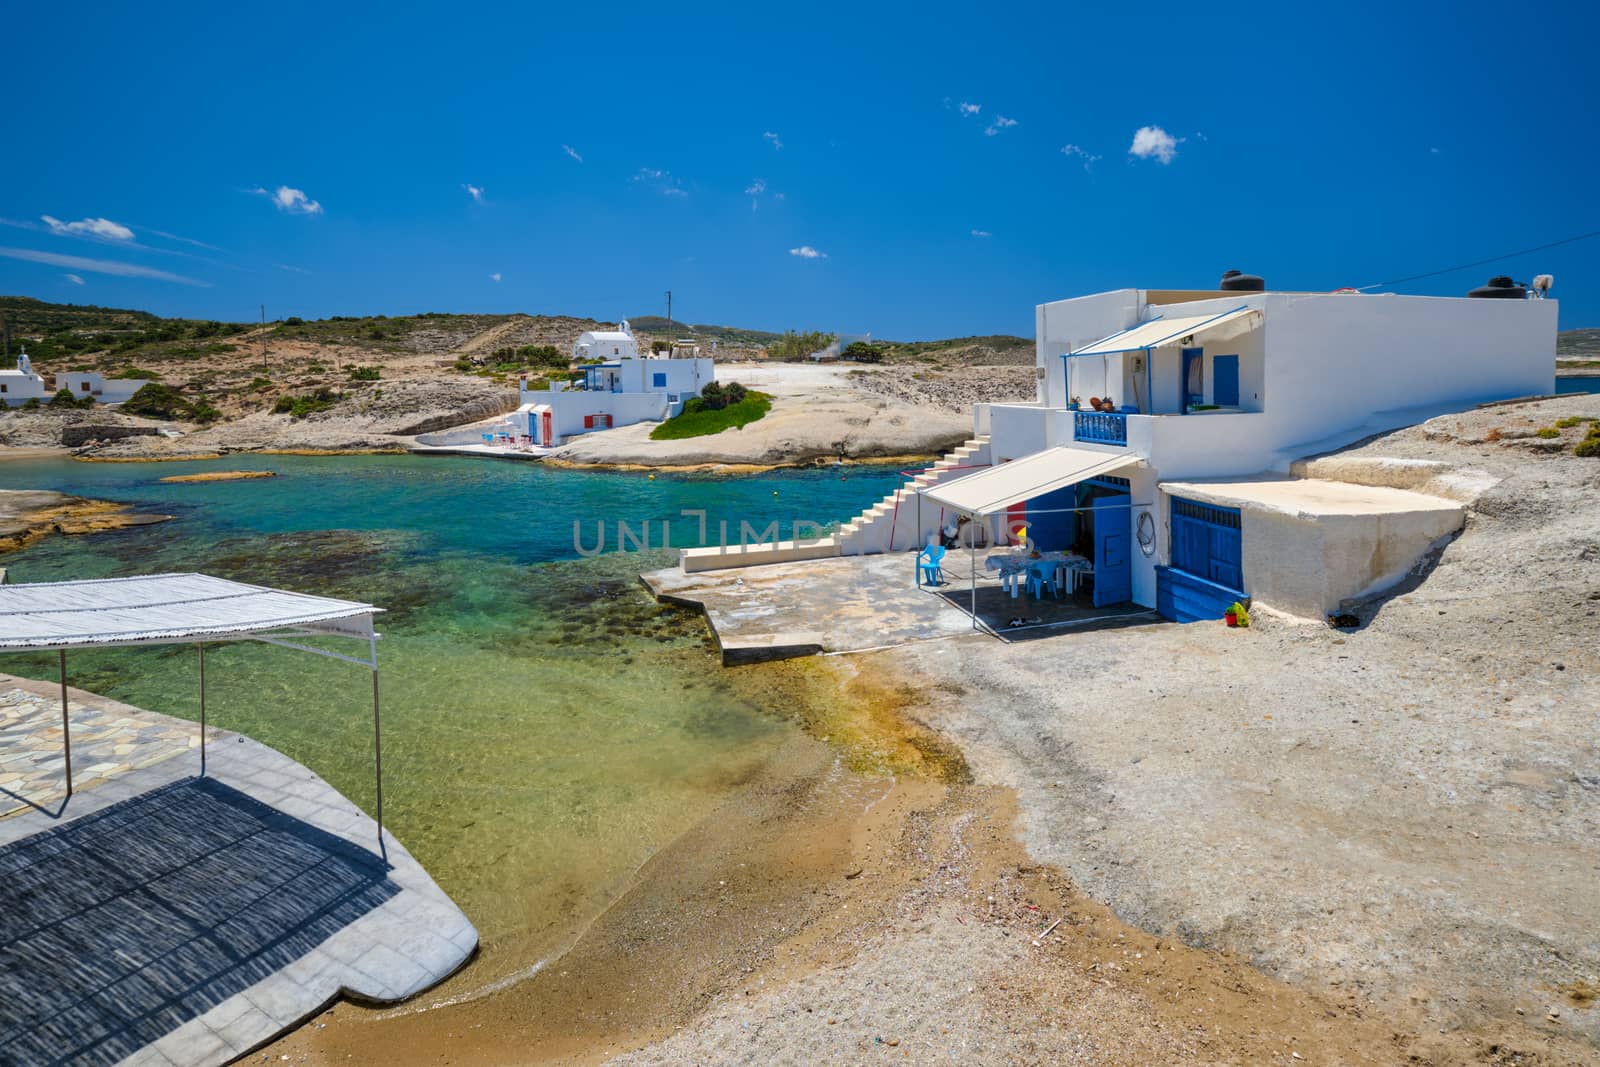 Greece scenic island view - small harbor with crystal clear turquoise water, traditishional whitewashed house. Pachena village, Milos island, Greece.